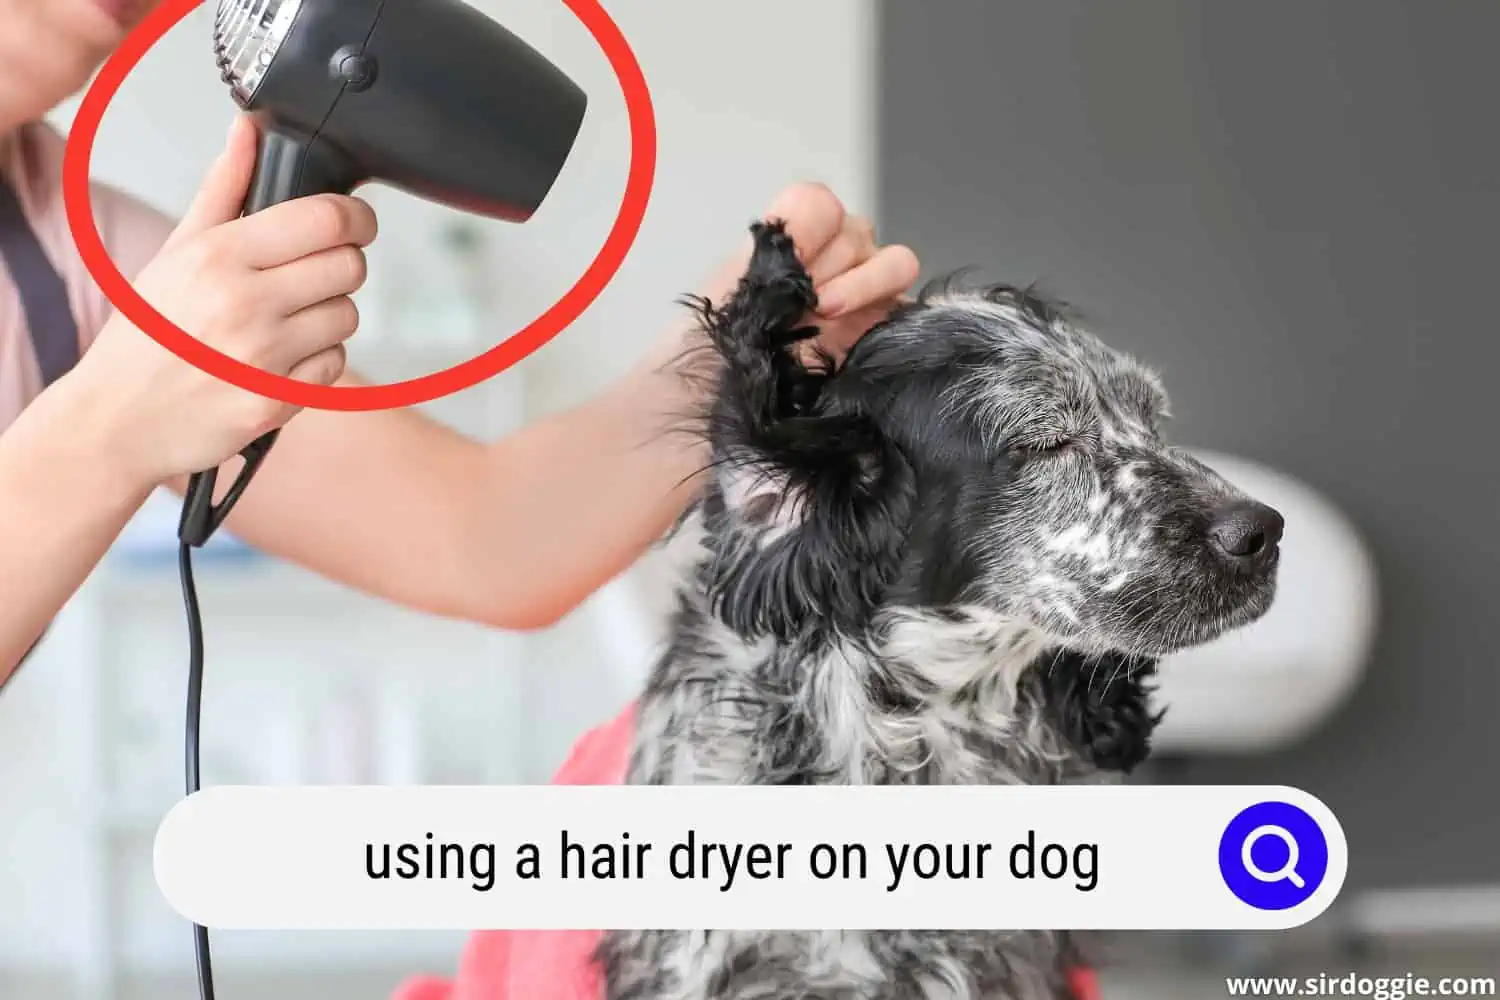 A pet owner blowing the dogs hair using a hair dryer